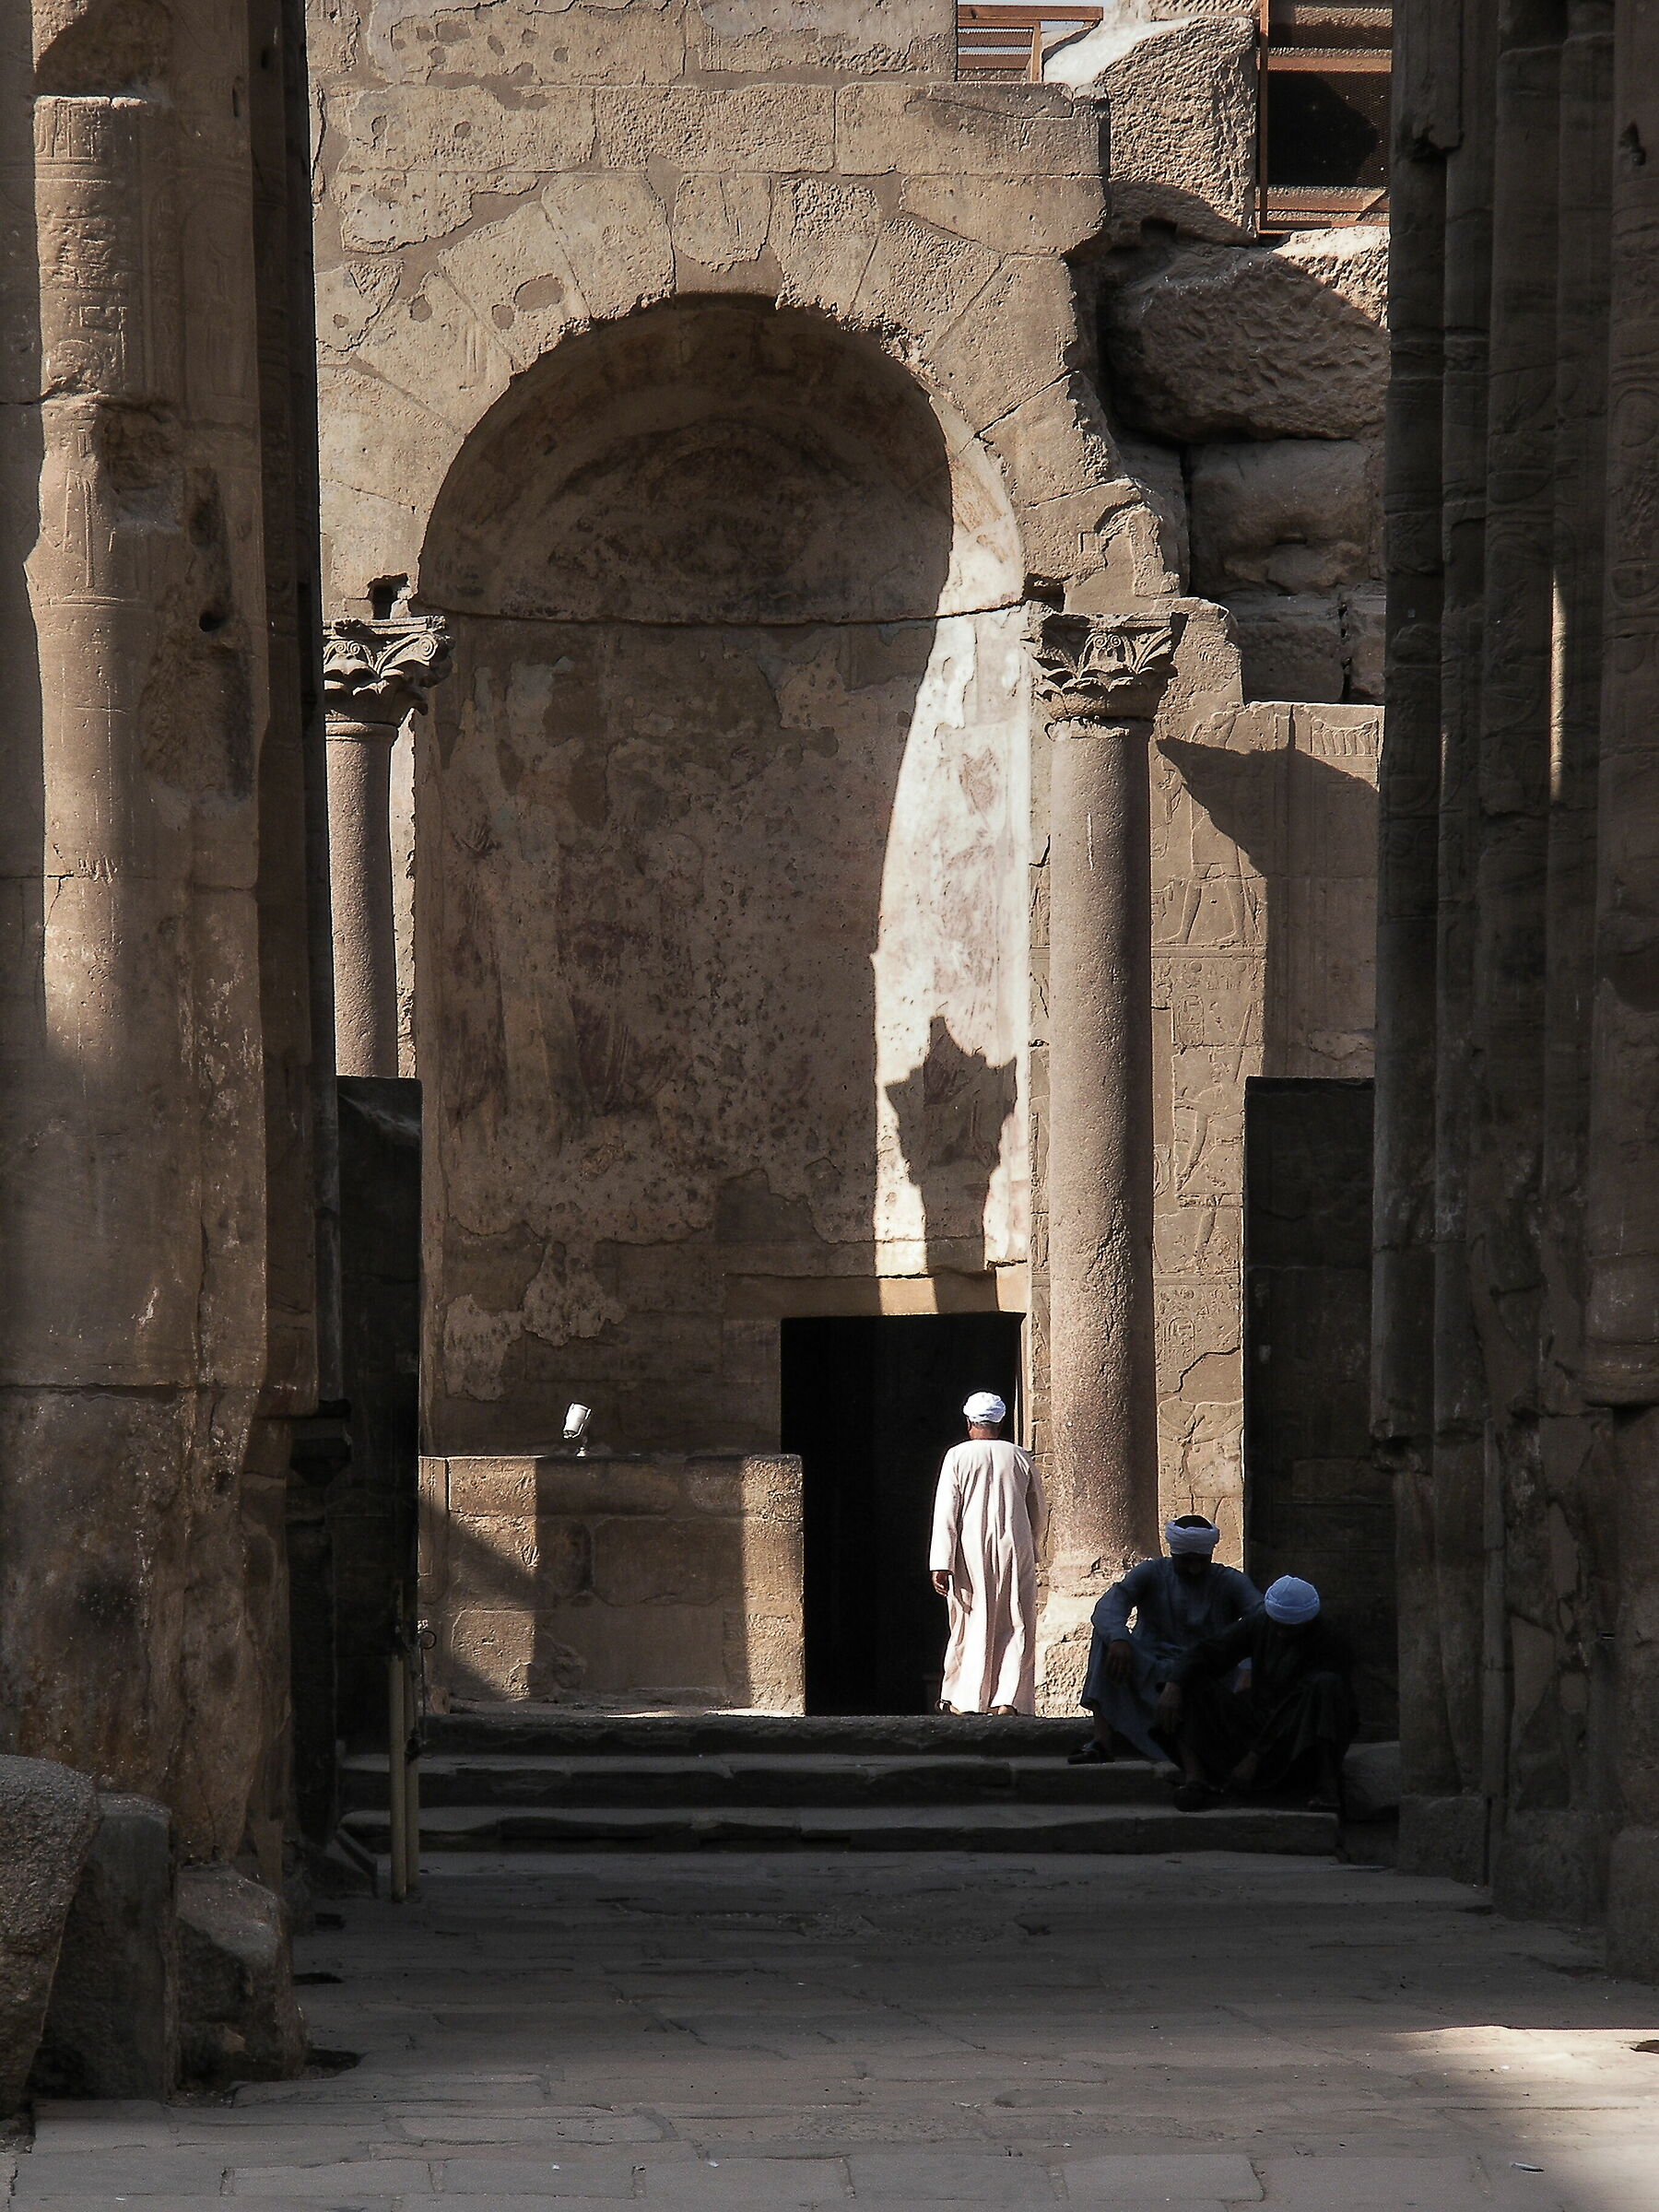 Today as centuries ago at the temple of Luxor...